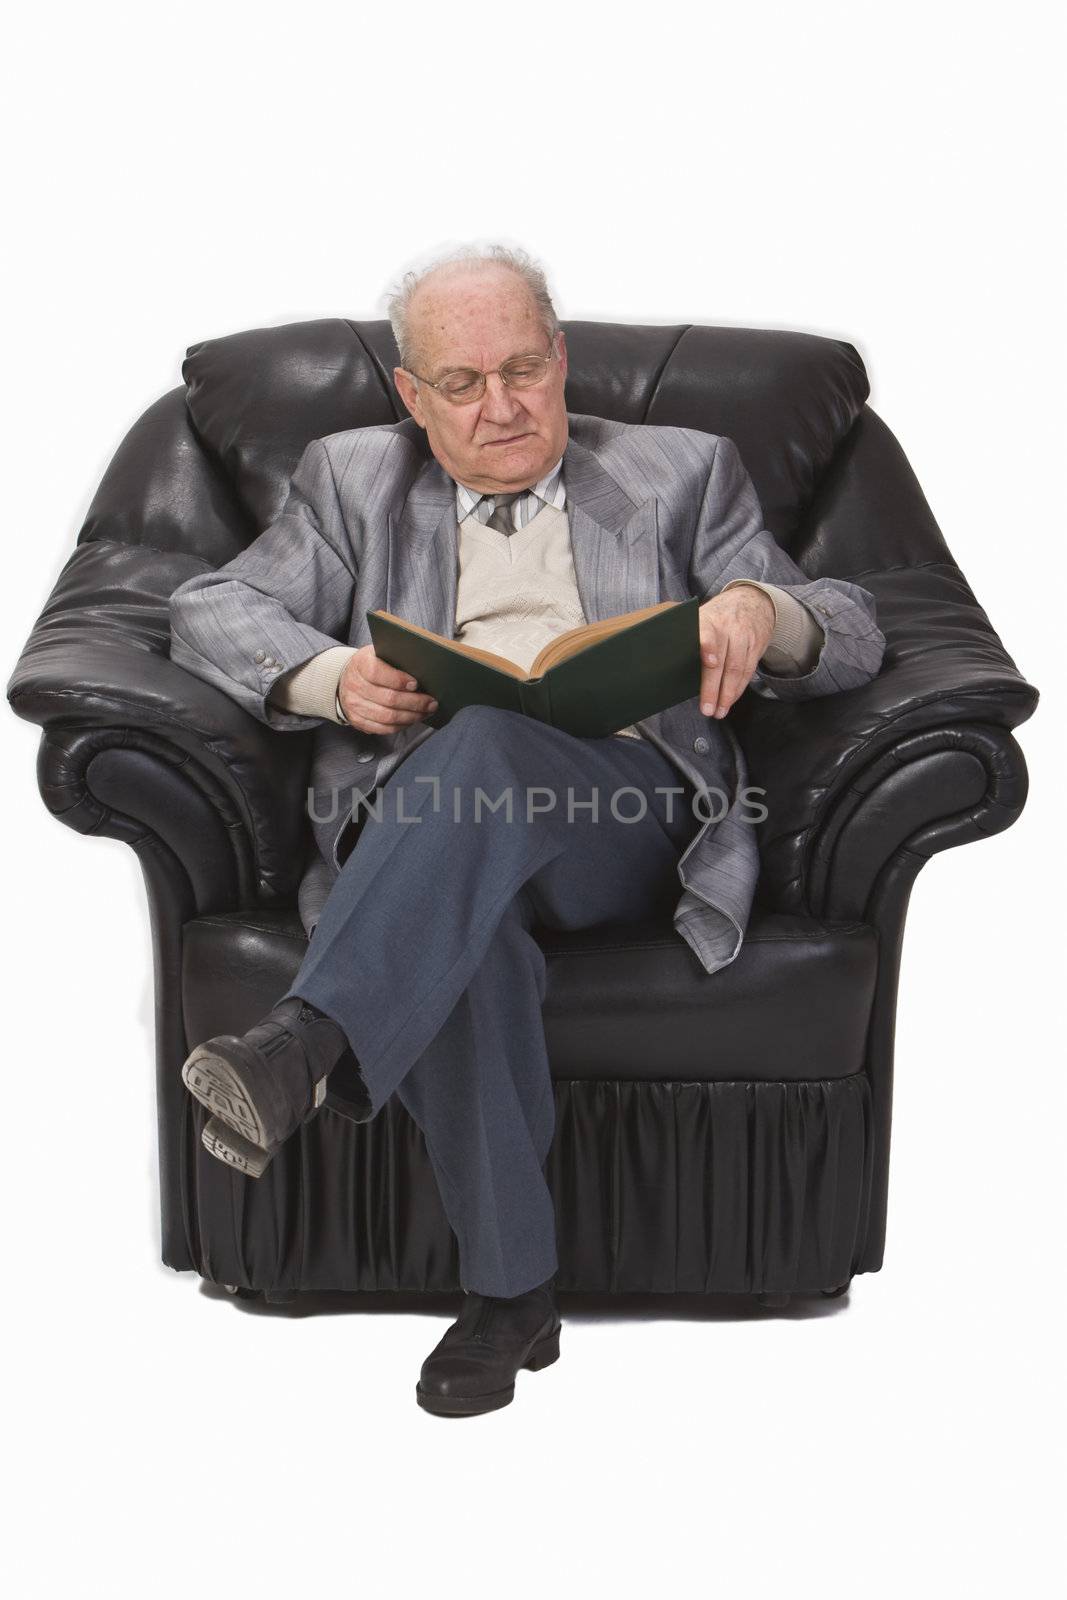 Senior man sitting in an armchair and reading a book.Shot with Canon 70-200mm f/2.8L IS USM